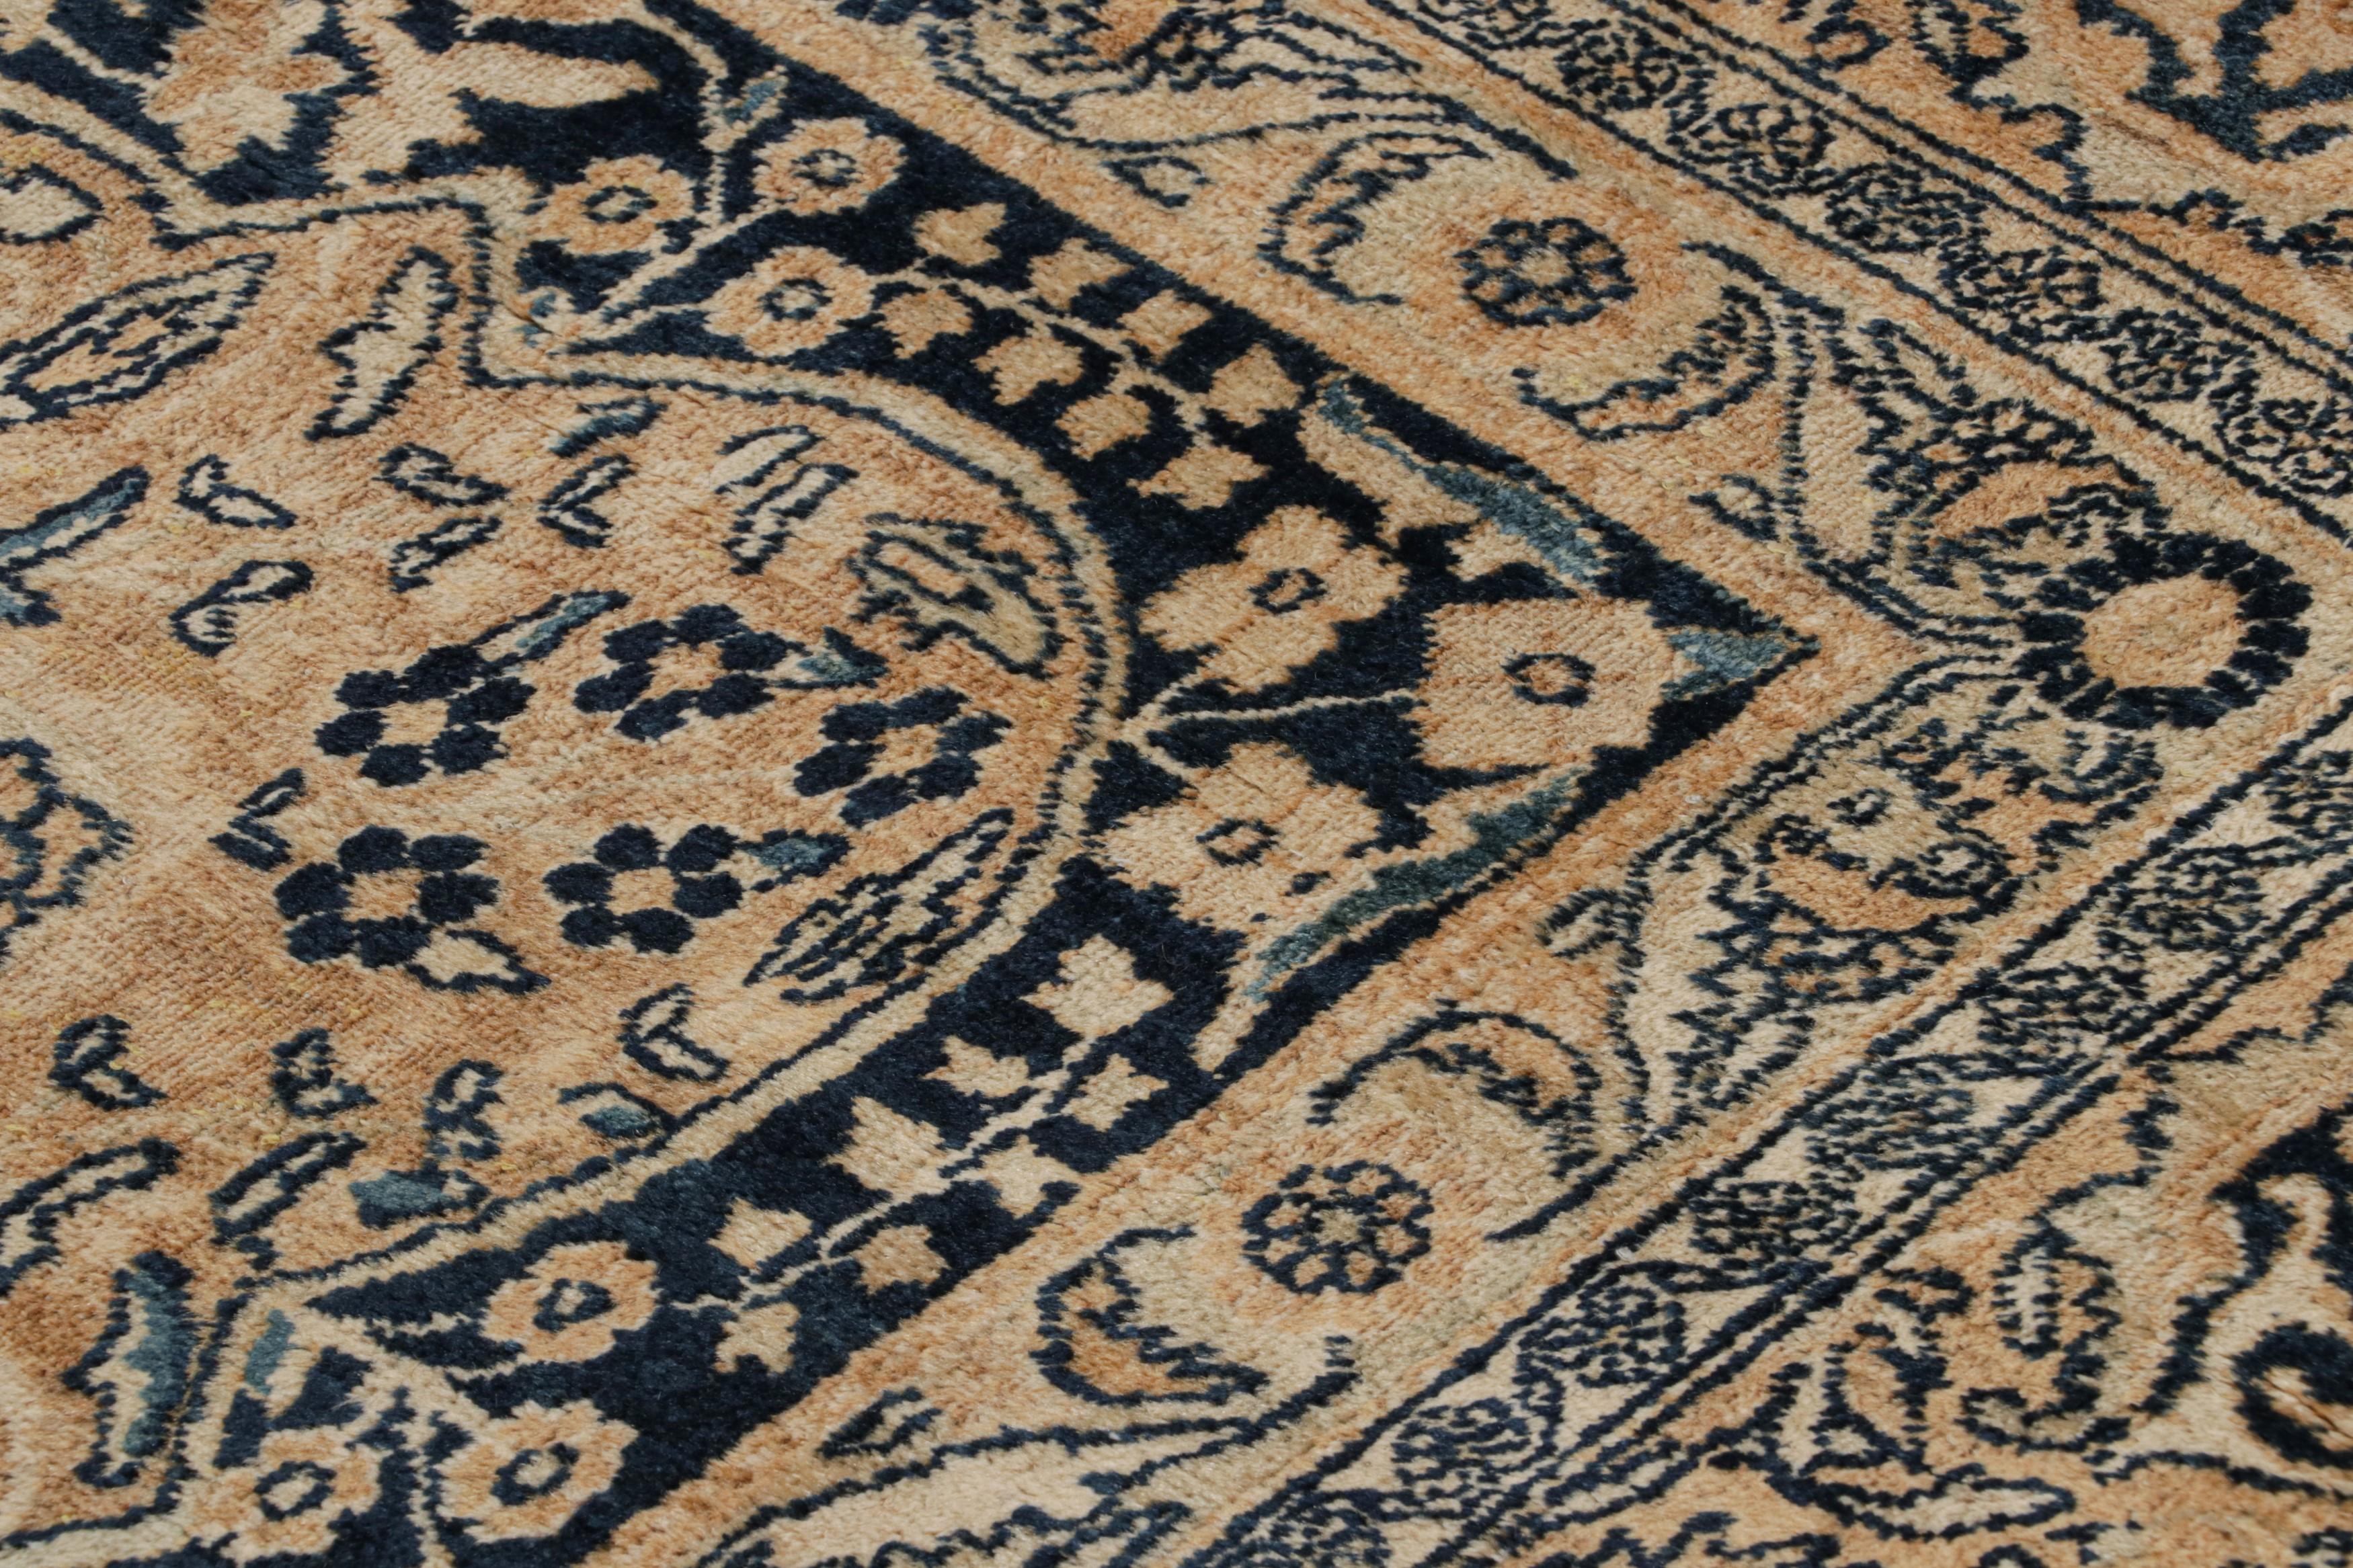 Early 20th Century Antique Persian Yazd Rug in Gold-Blue Floral Patterns by Rug & Kilim  For Sale